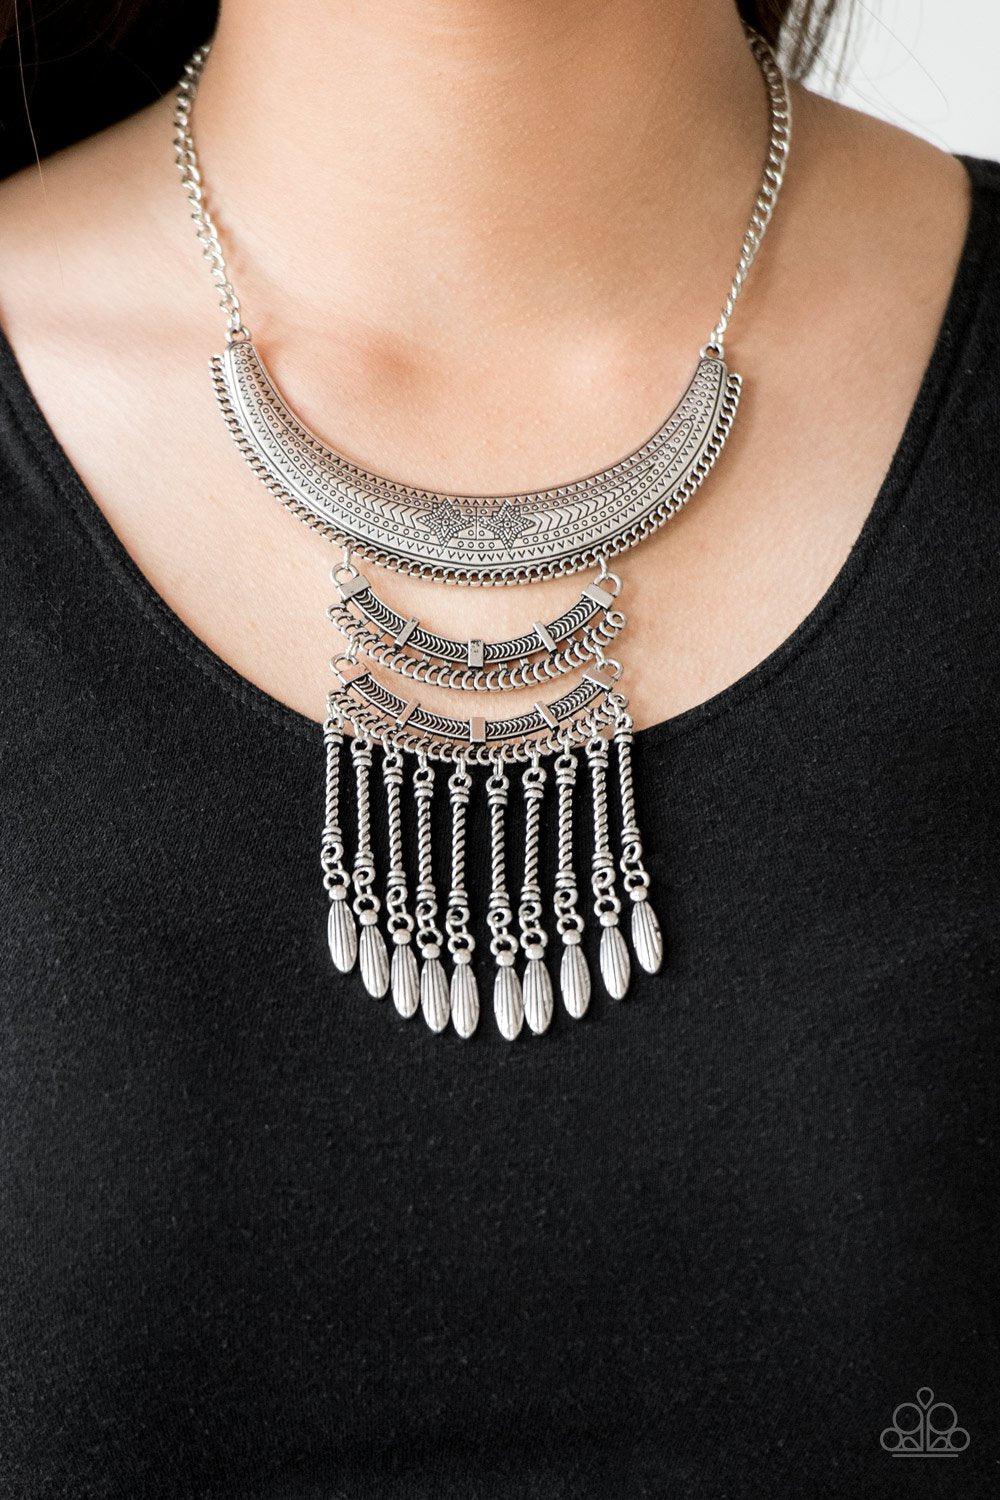 Eastern Empress Silver Fringe Necklace - Paparazzi Accessories-CarasShop.com - $5 Jewelry by Cara Jewels